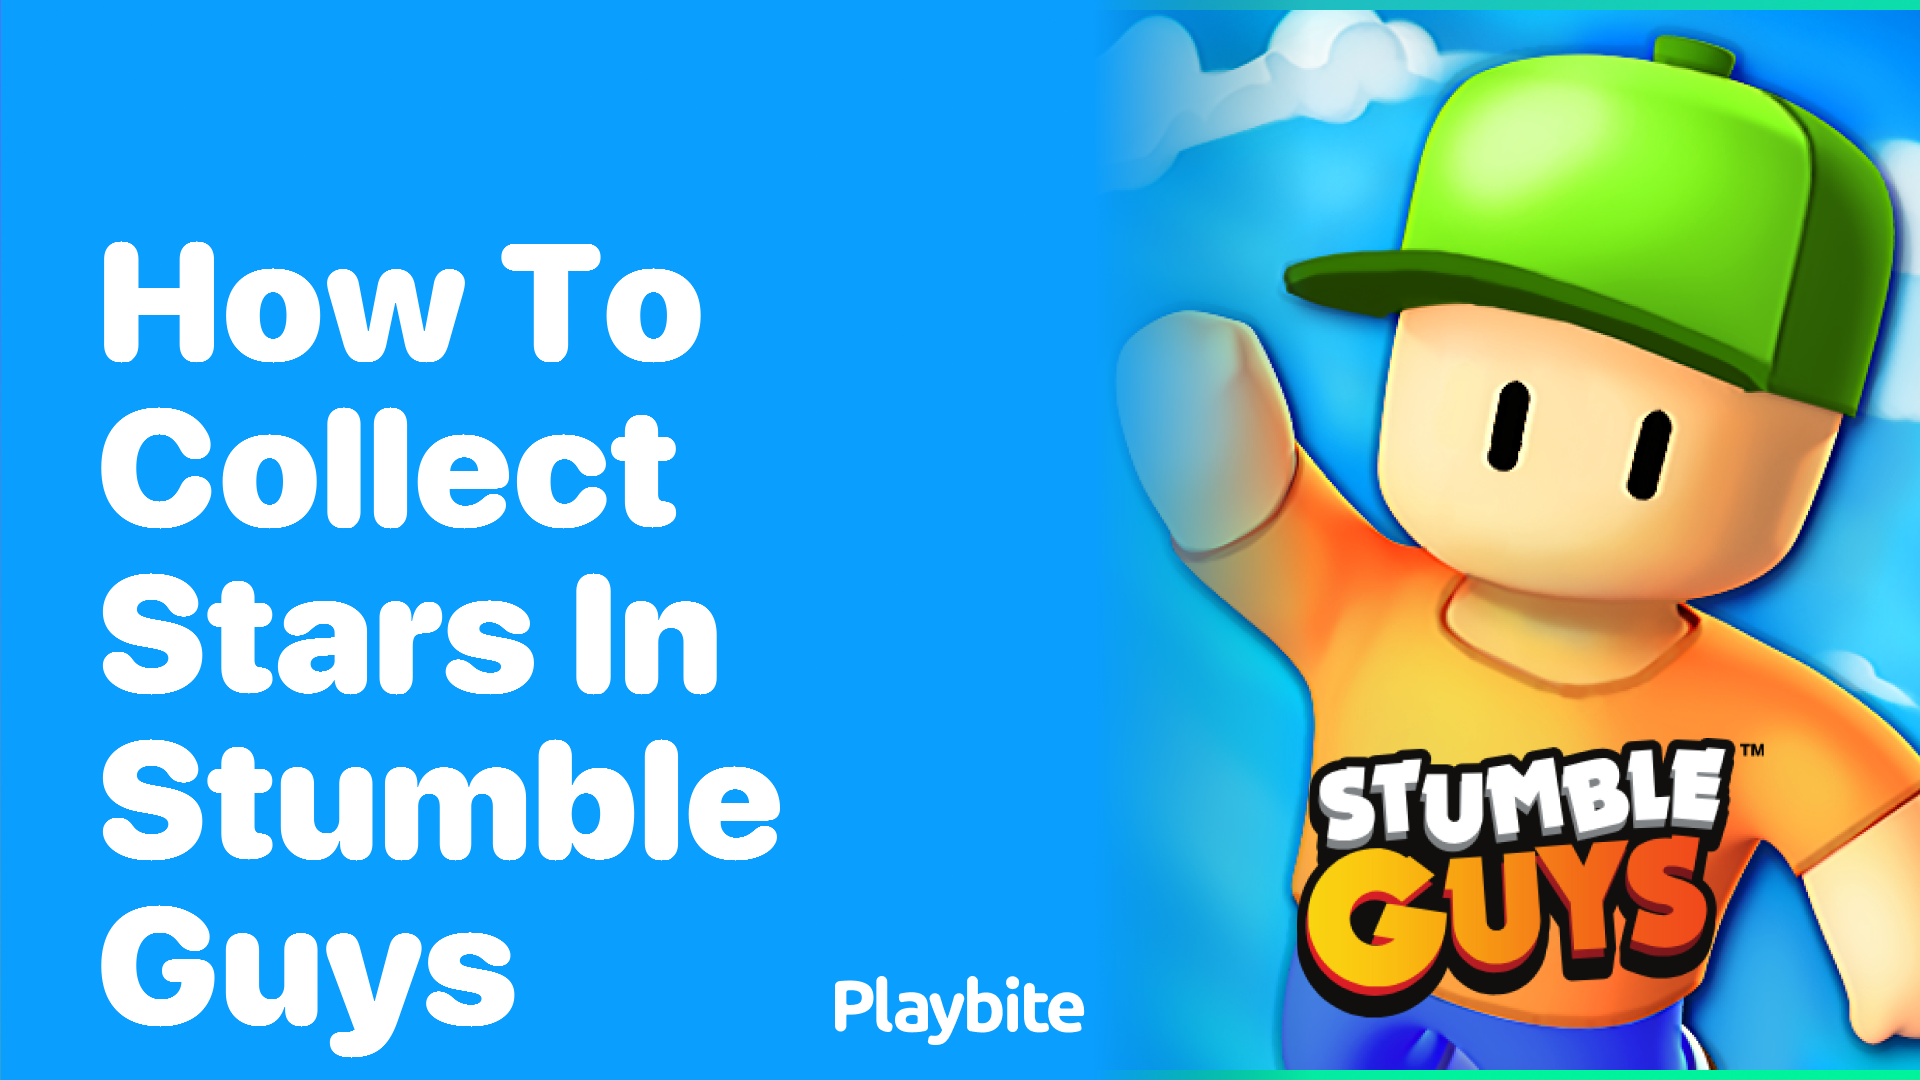 How to Collect Stars in Stumble Guys: A Fun Guide